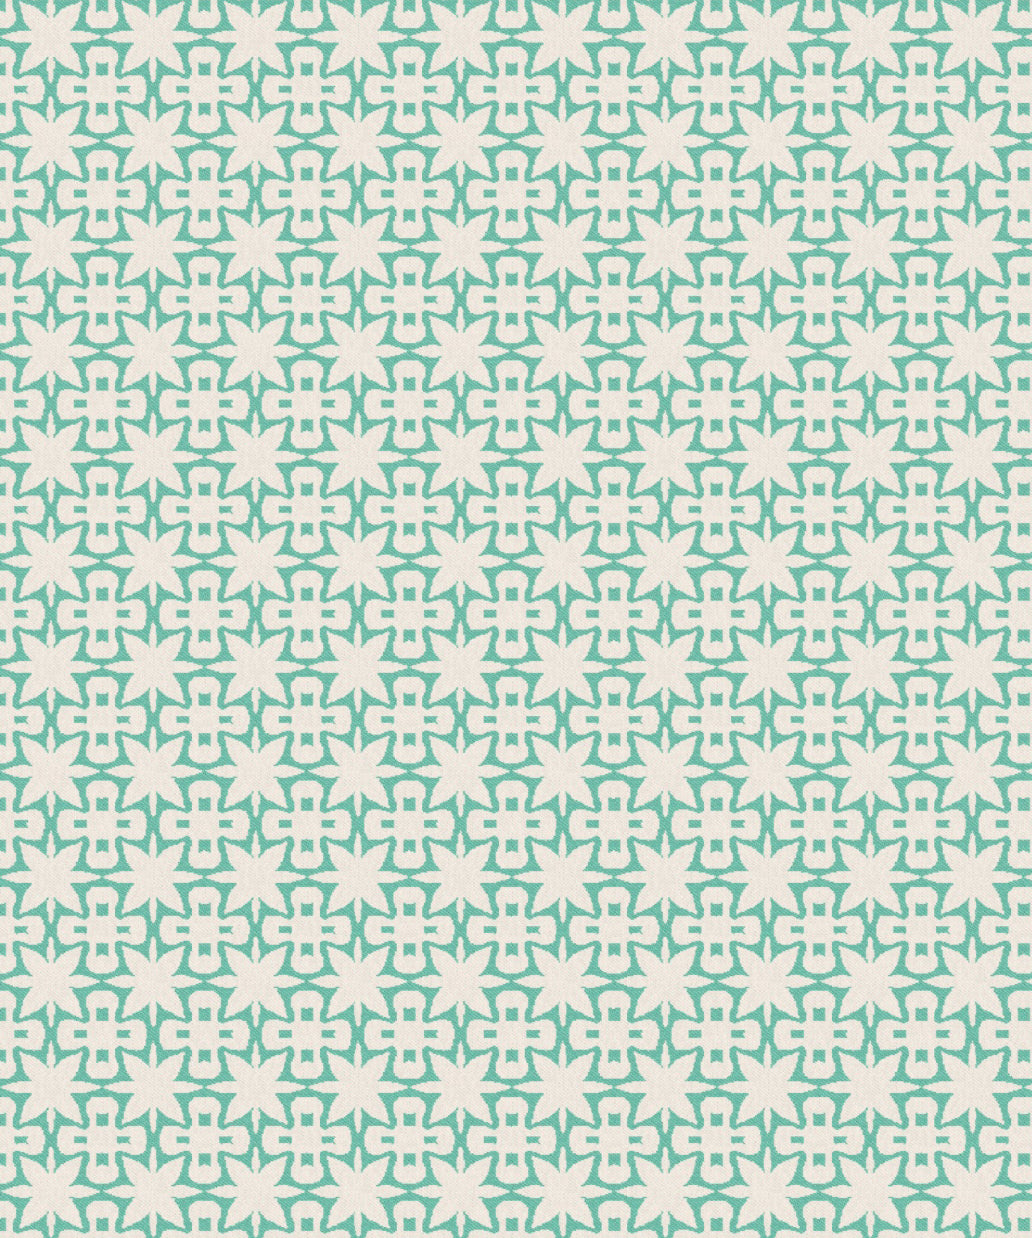 Riad Fabric in color Turquoise